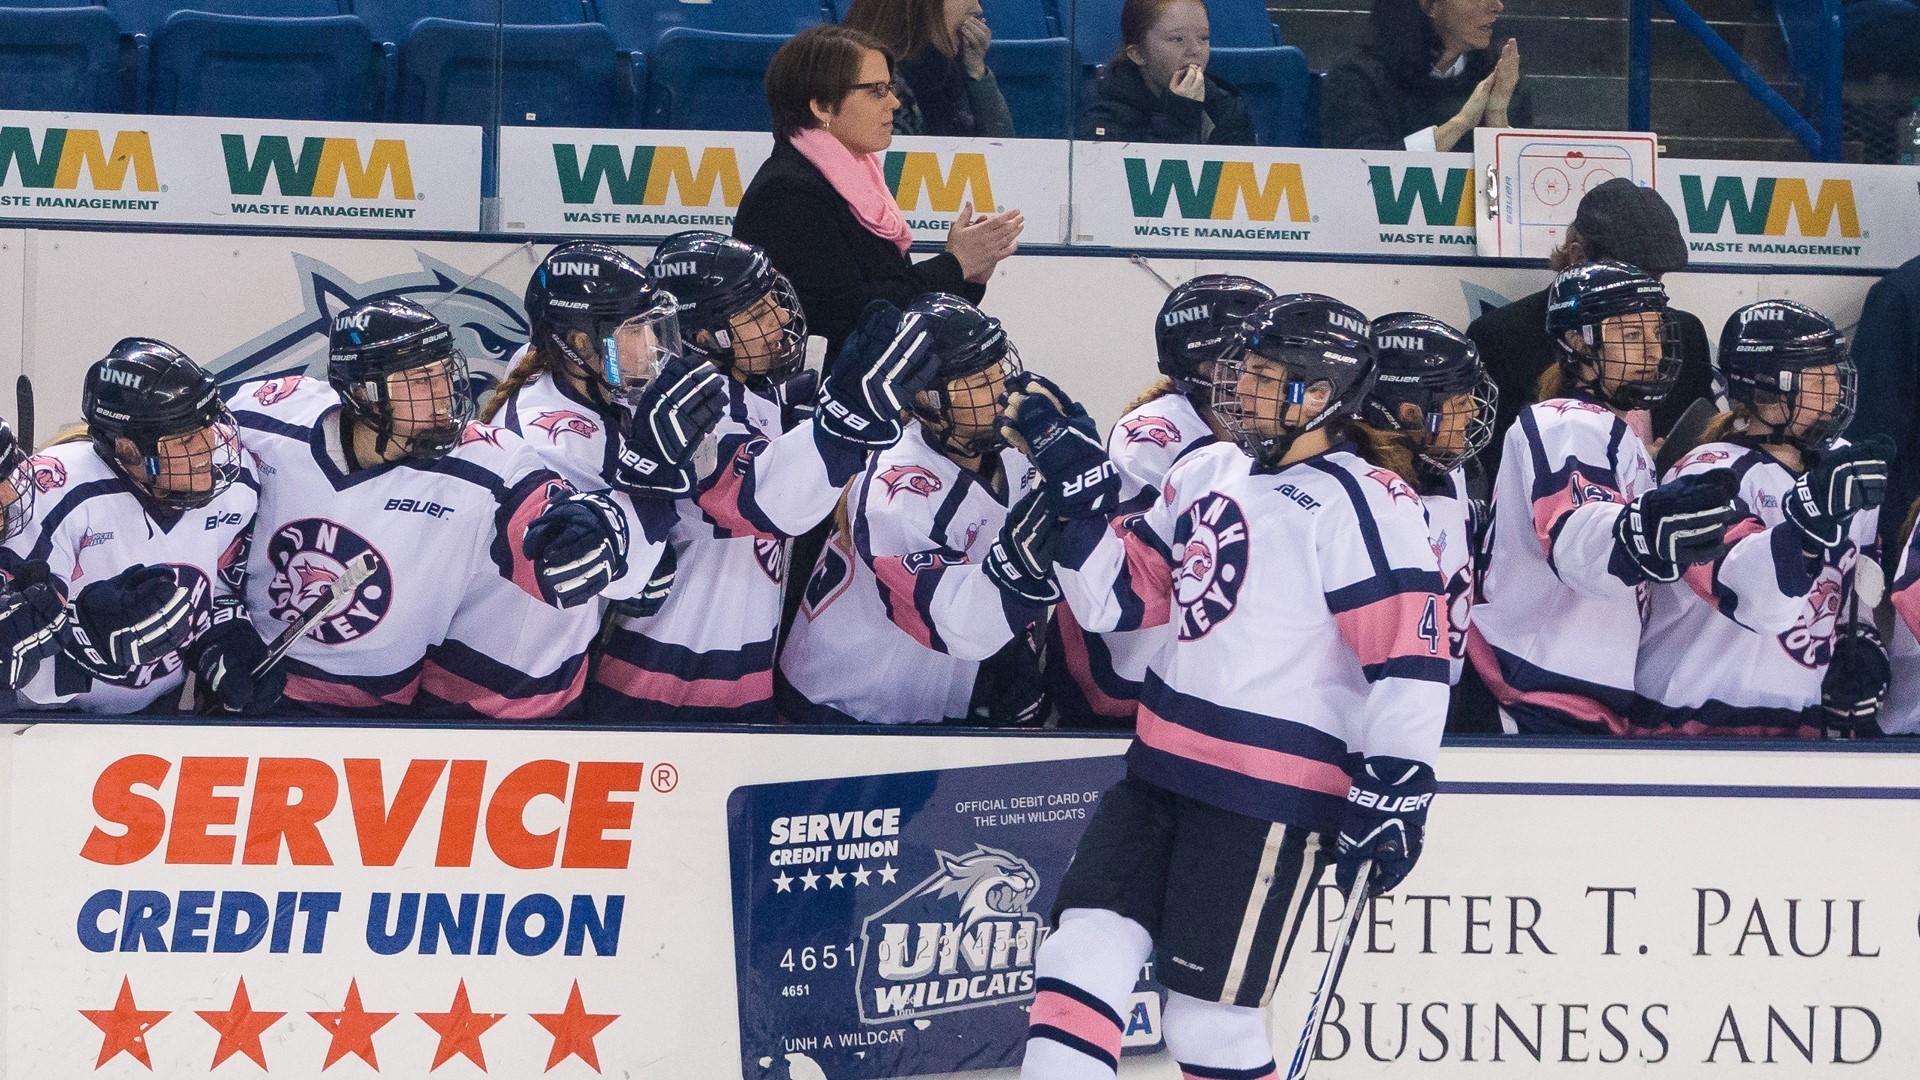 The UNH Wildcats women's hockey team during the 2014-15 season.  College sports have many legal obligations to protect their student athletes, thus allowing more oversight of their programs than you might find at the pro level.